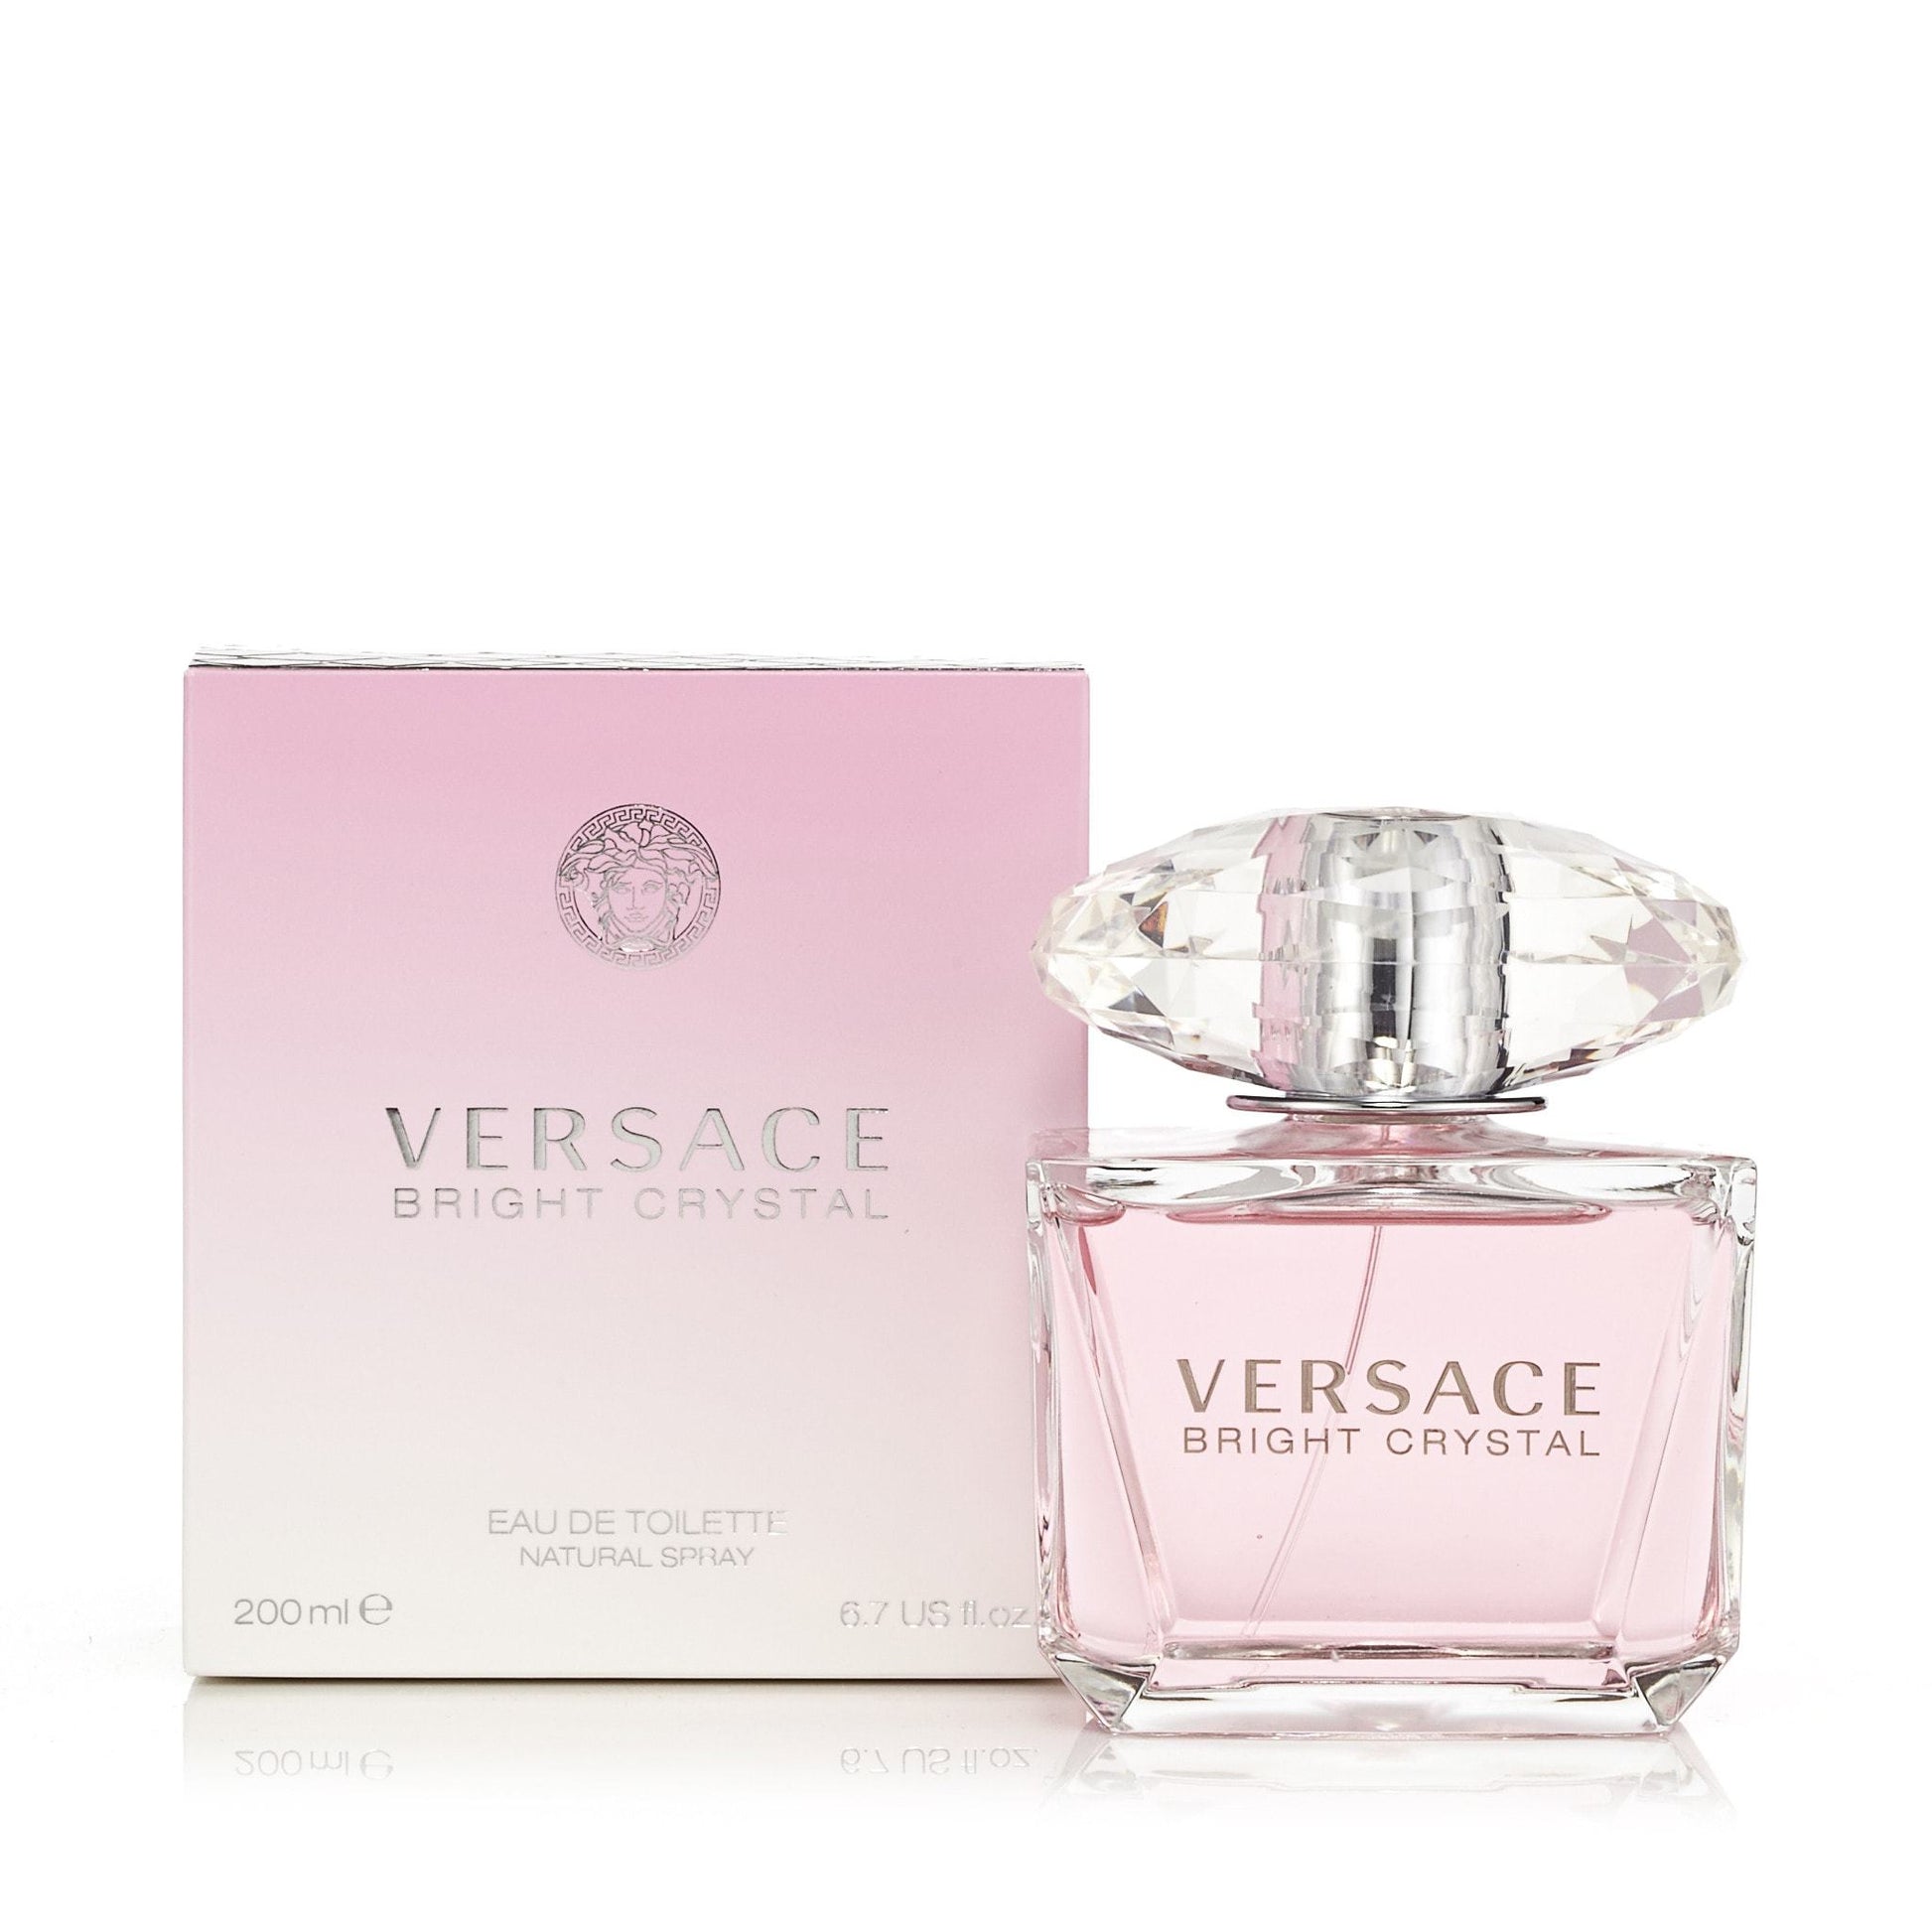 Bright Crystal Eau de Toilette Spray for Women by Versace, Product image 1